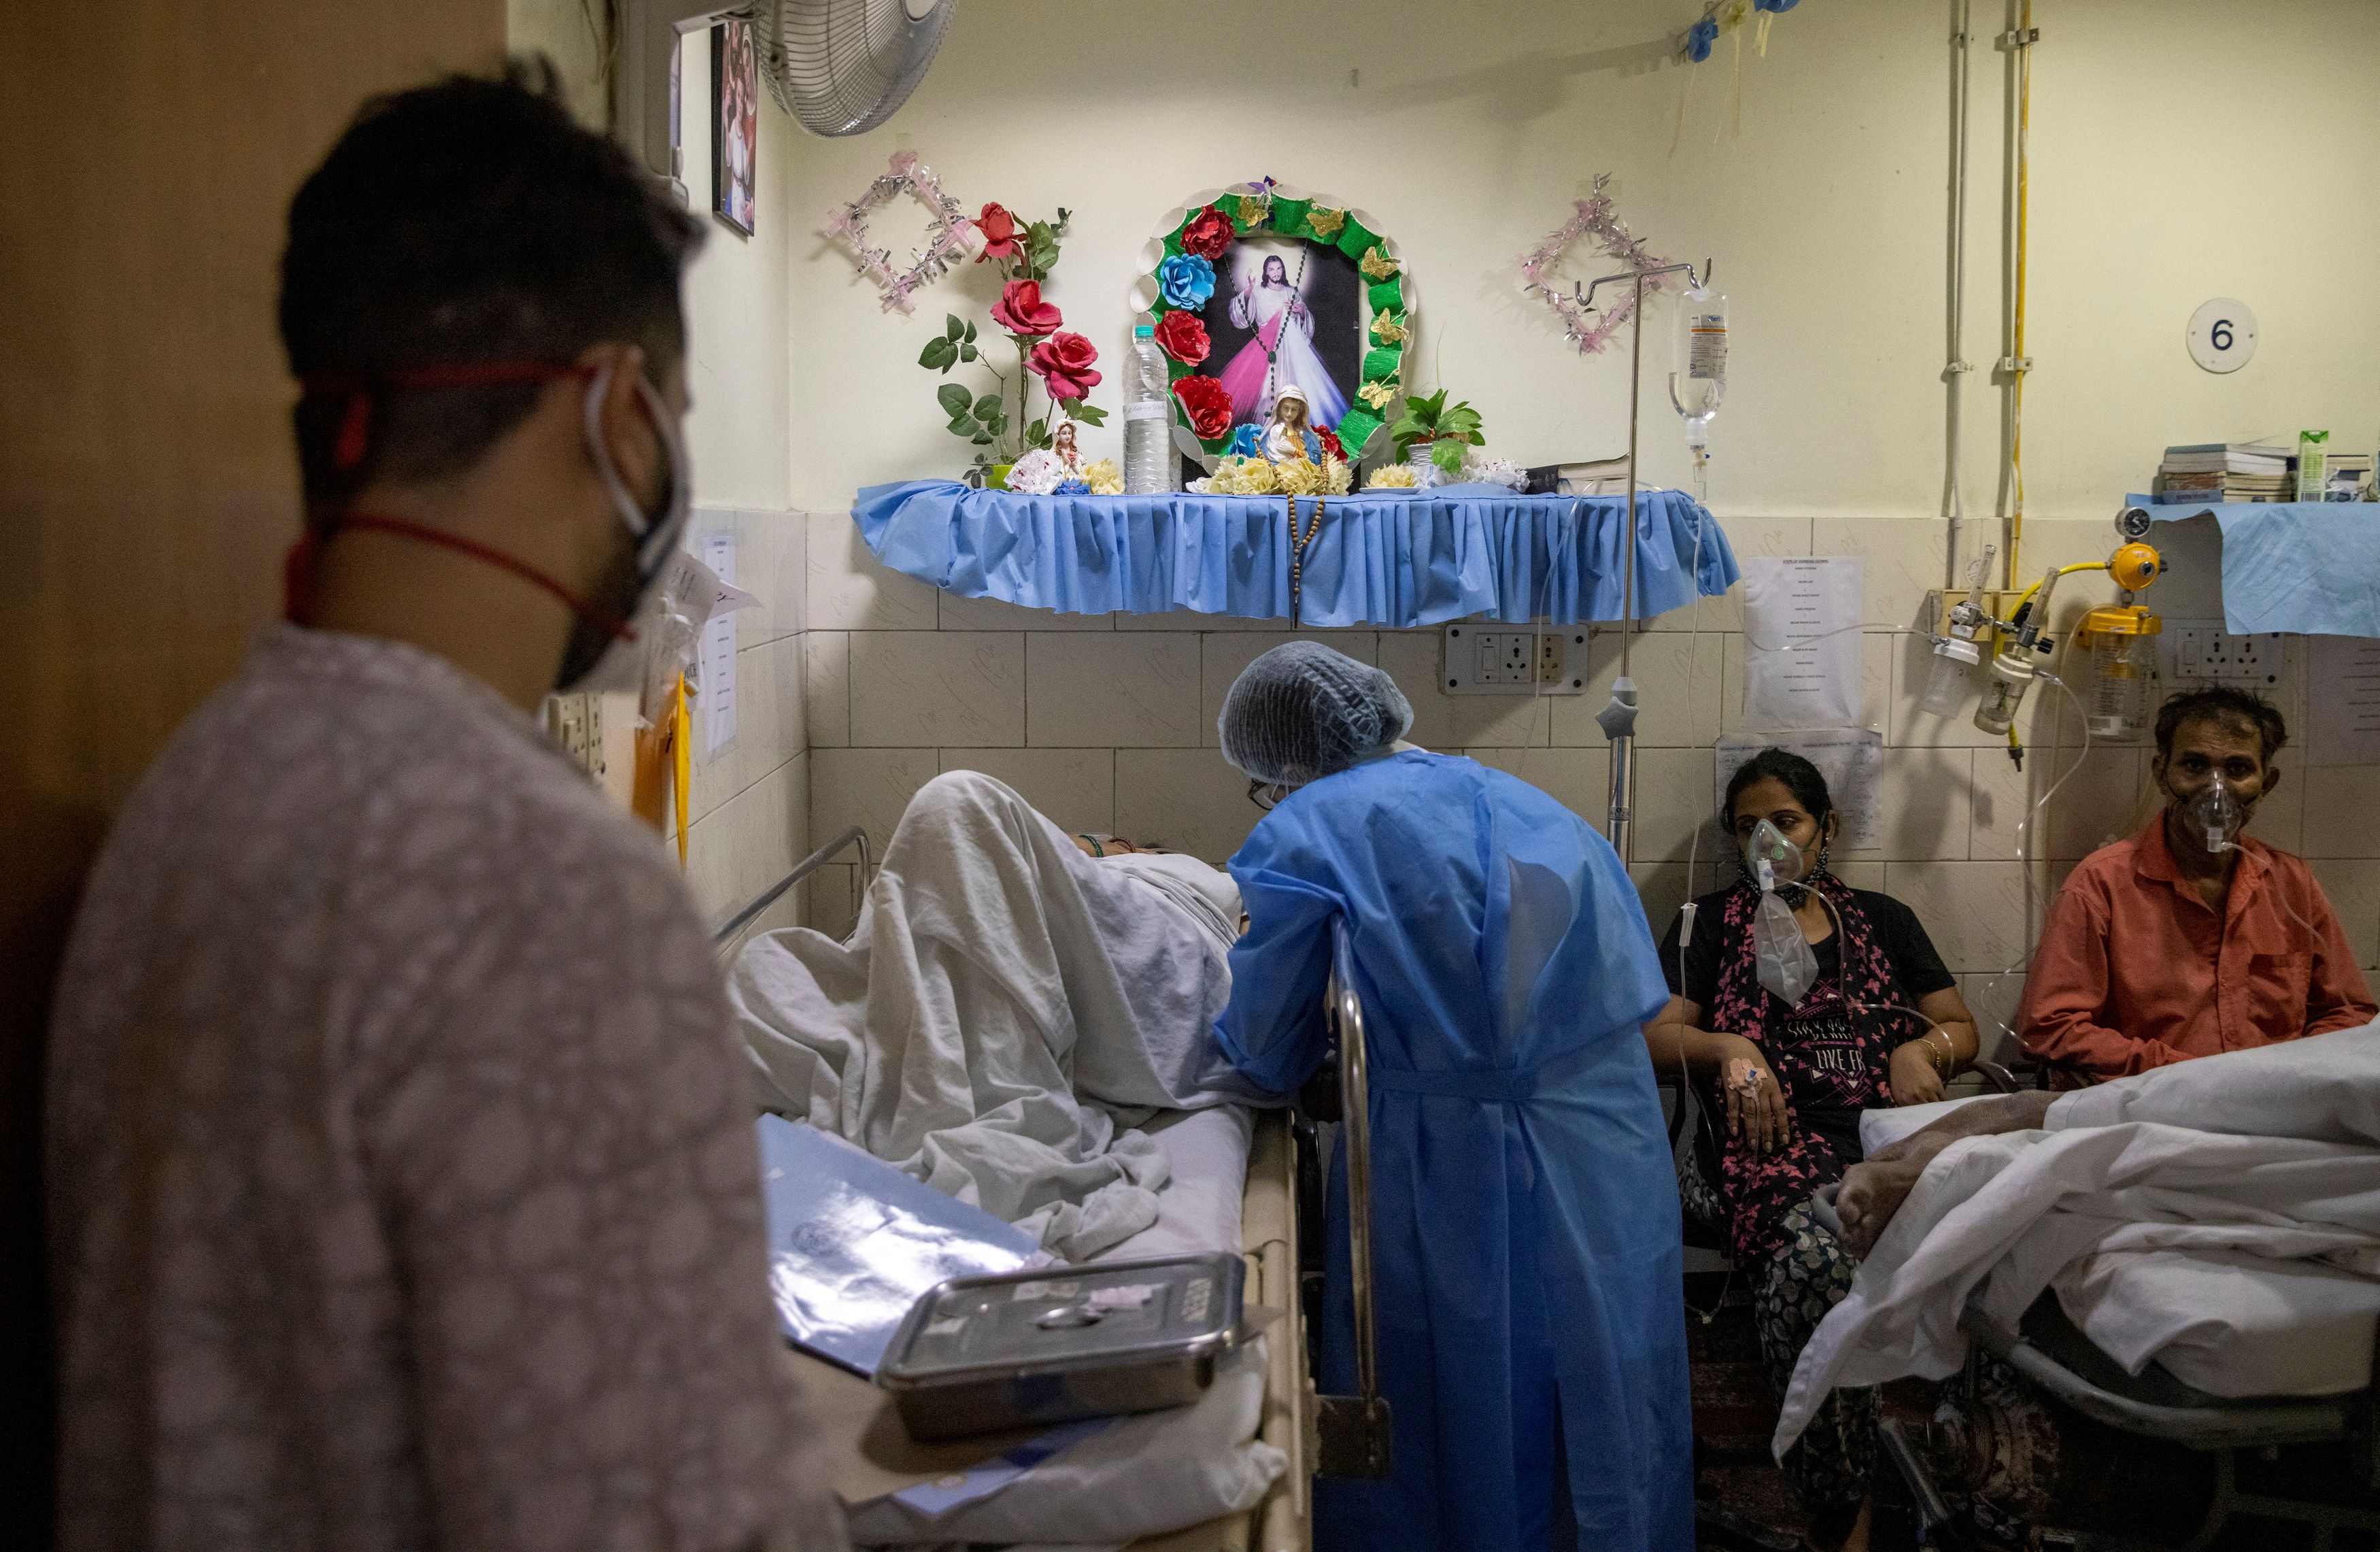 People suffering from the coronavirus disease (COVID-19) are treated inside an overcrowded casualty ward at a hospital in New Delhi, India, May 1, 2021. REUTERS/Danish Siddiqui